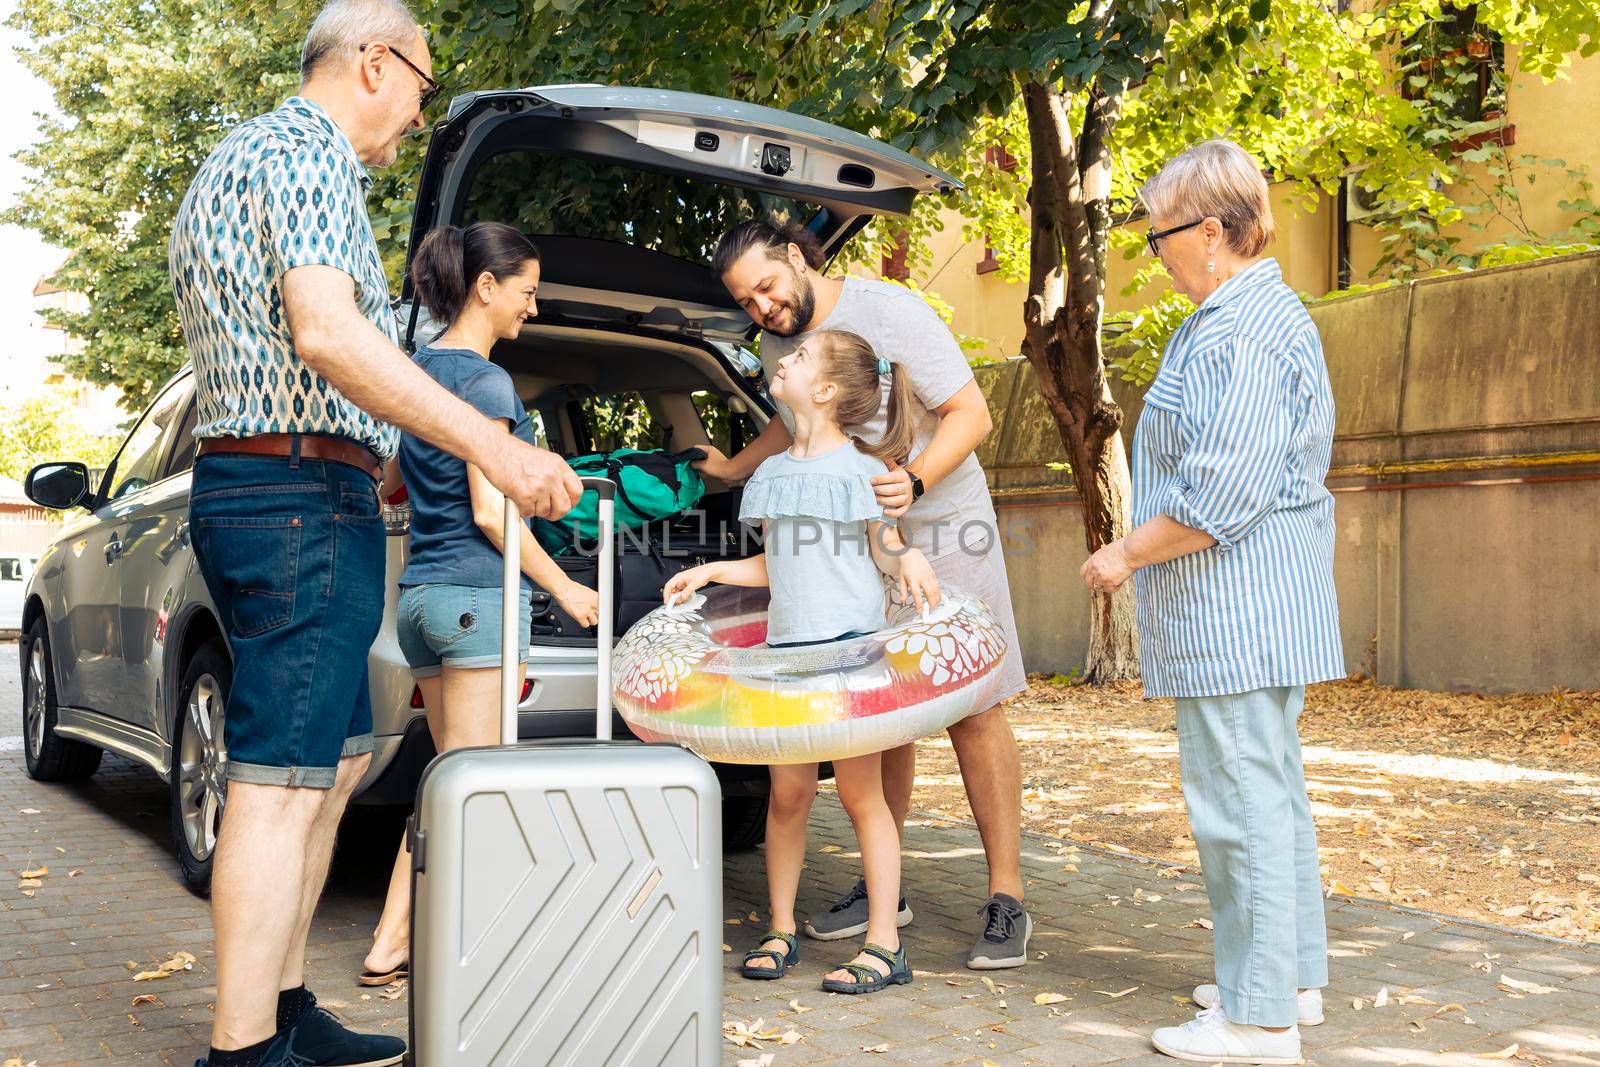 Happy family travelling at seaside with car, leaving on vacation trip with parents, grandparents and small girl. Loading luggage and suitcase in automobile trunk, summer adventure.